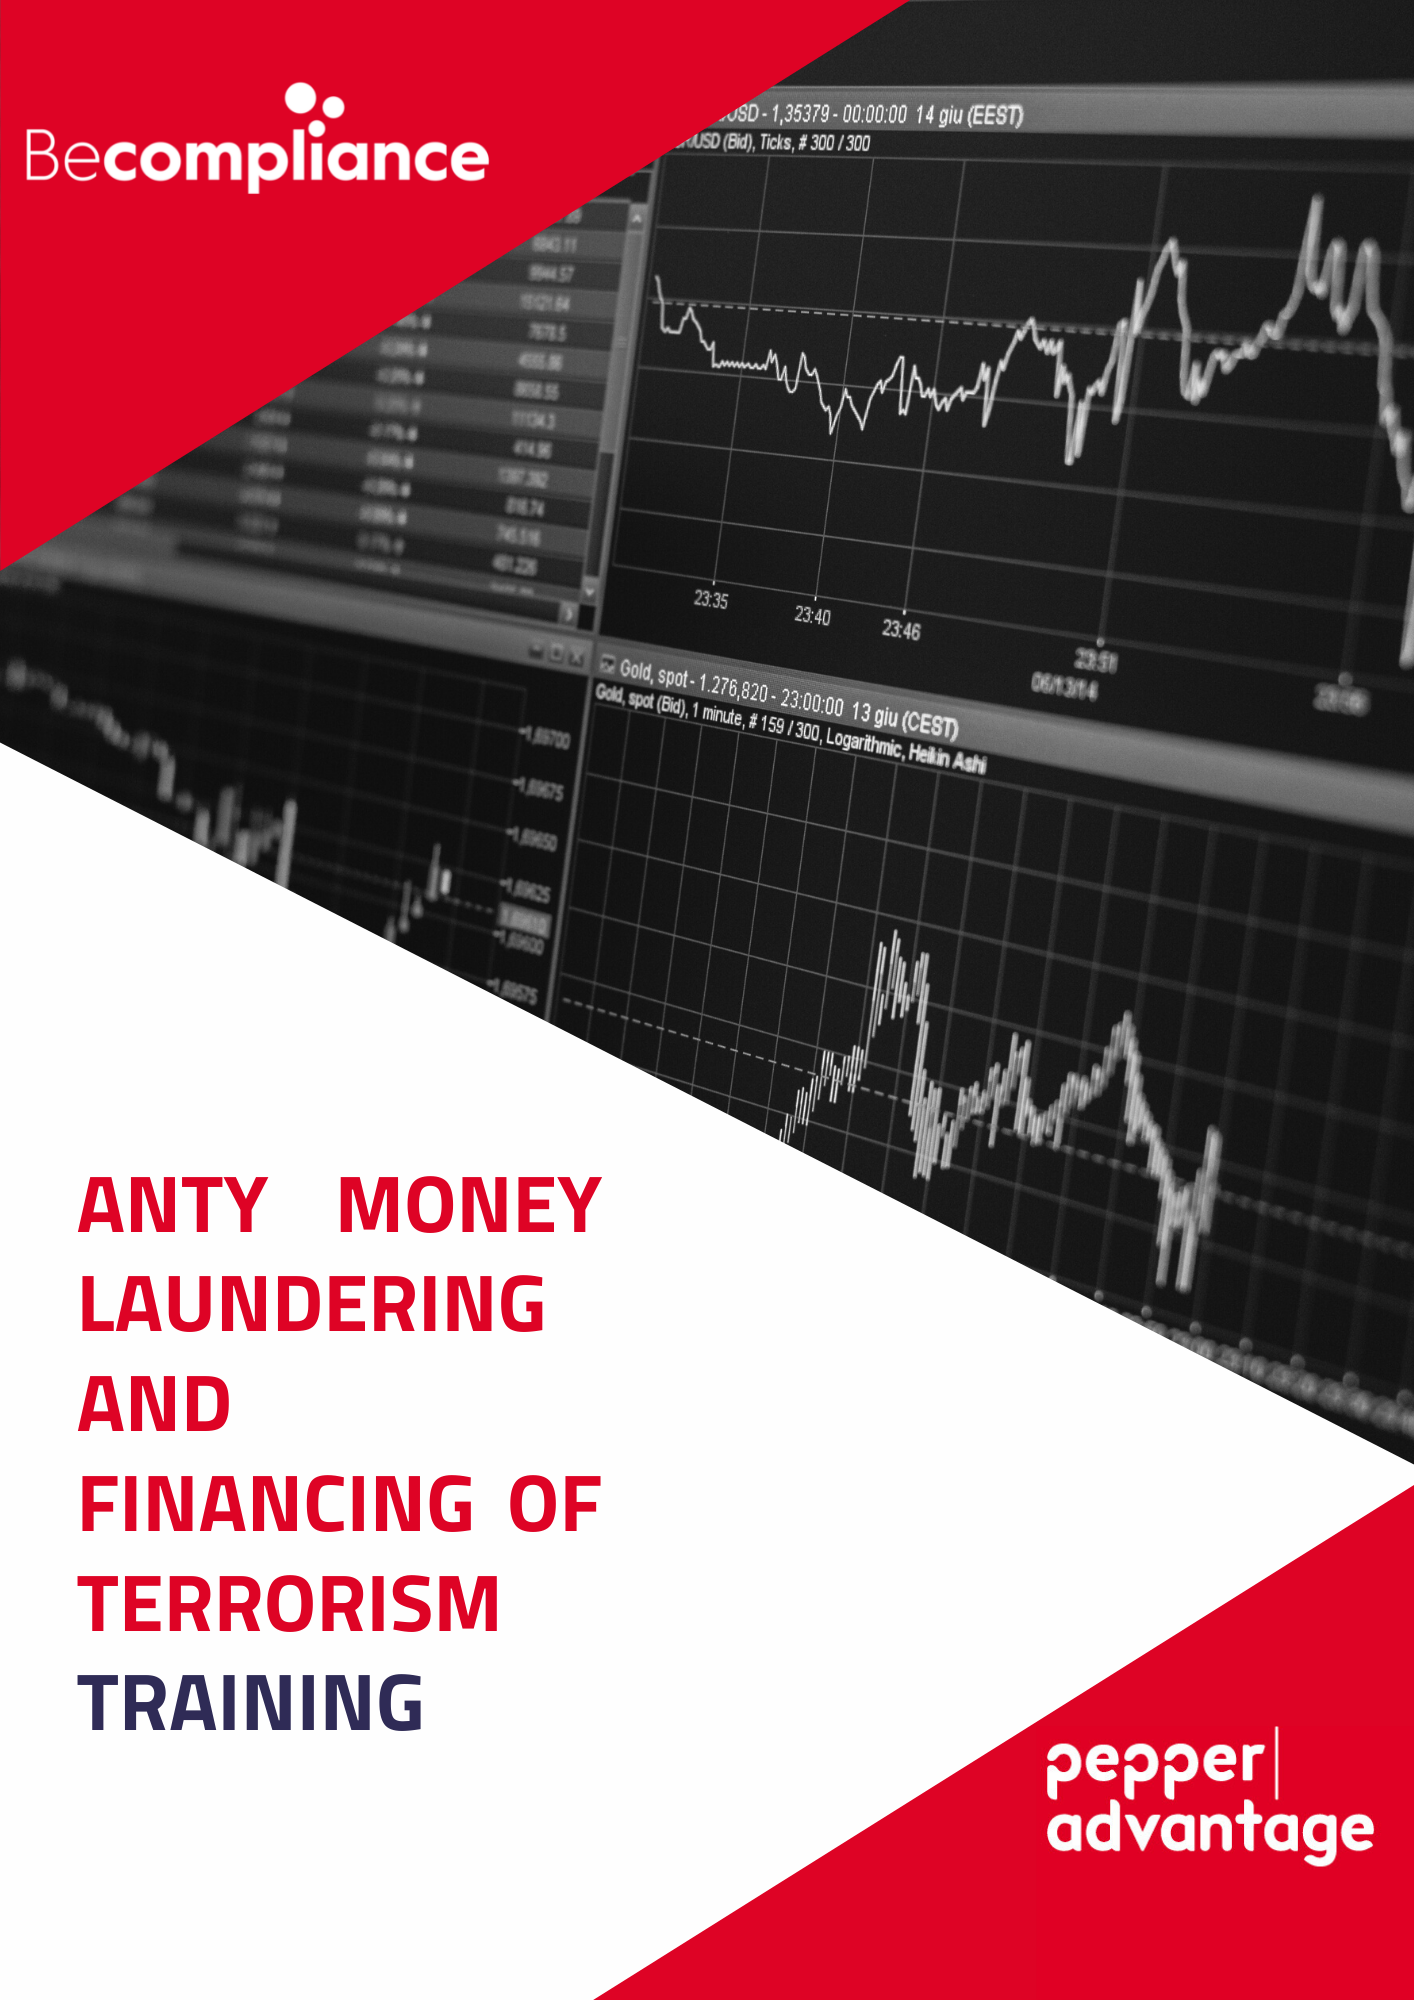 Anty Money Laundering and Terrorism Financing Training PSS year 2022